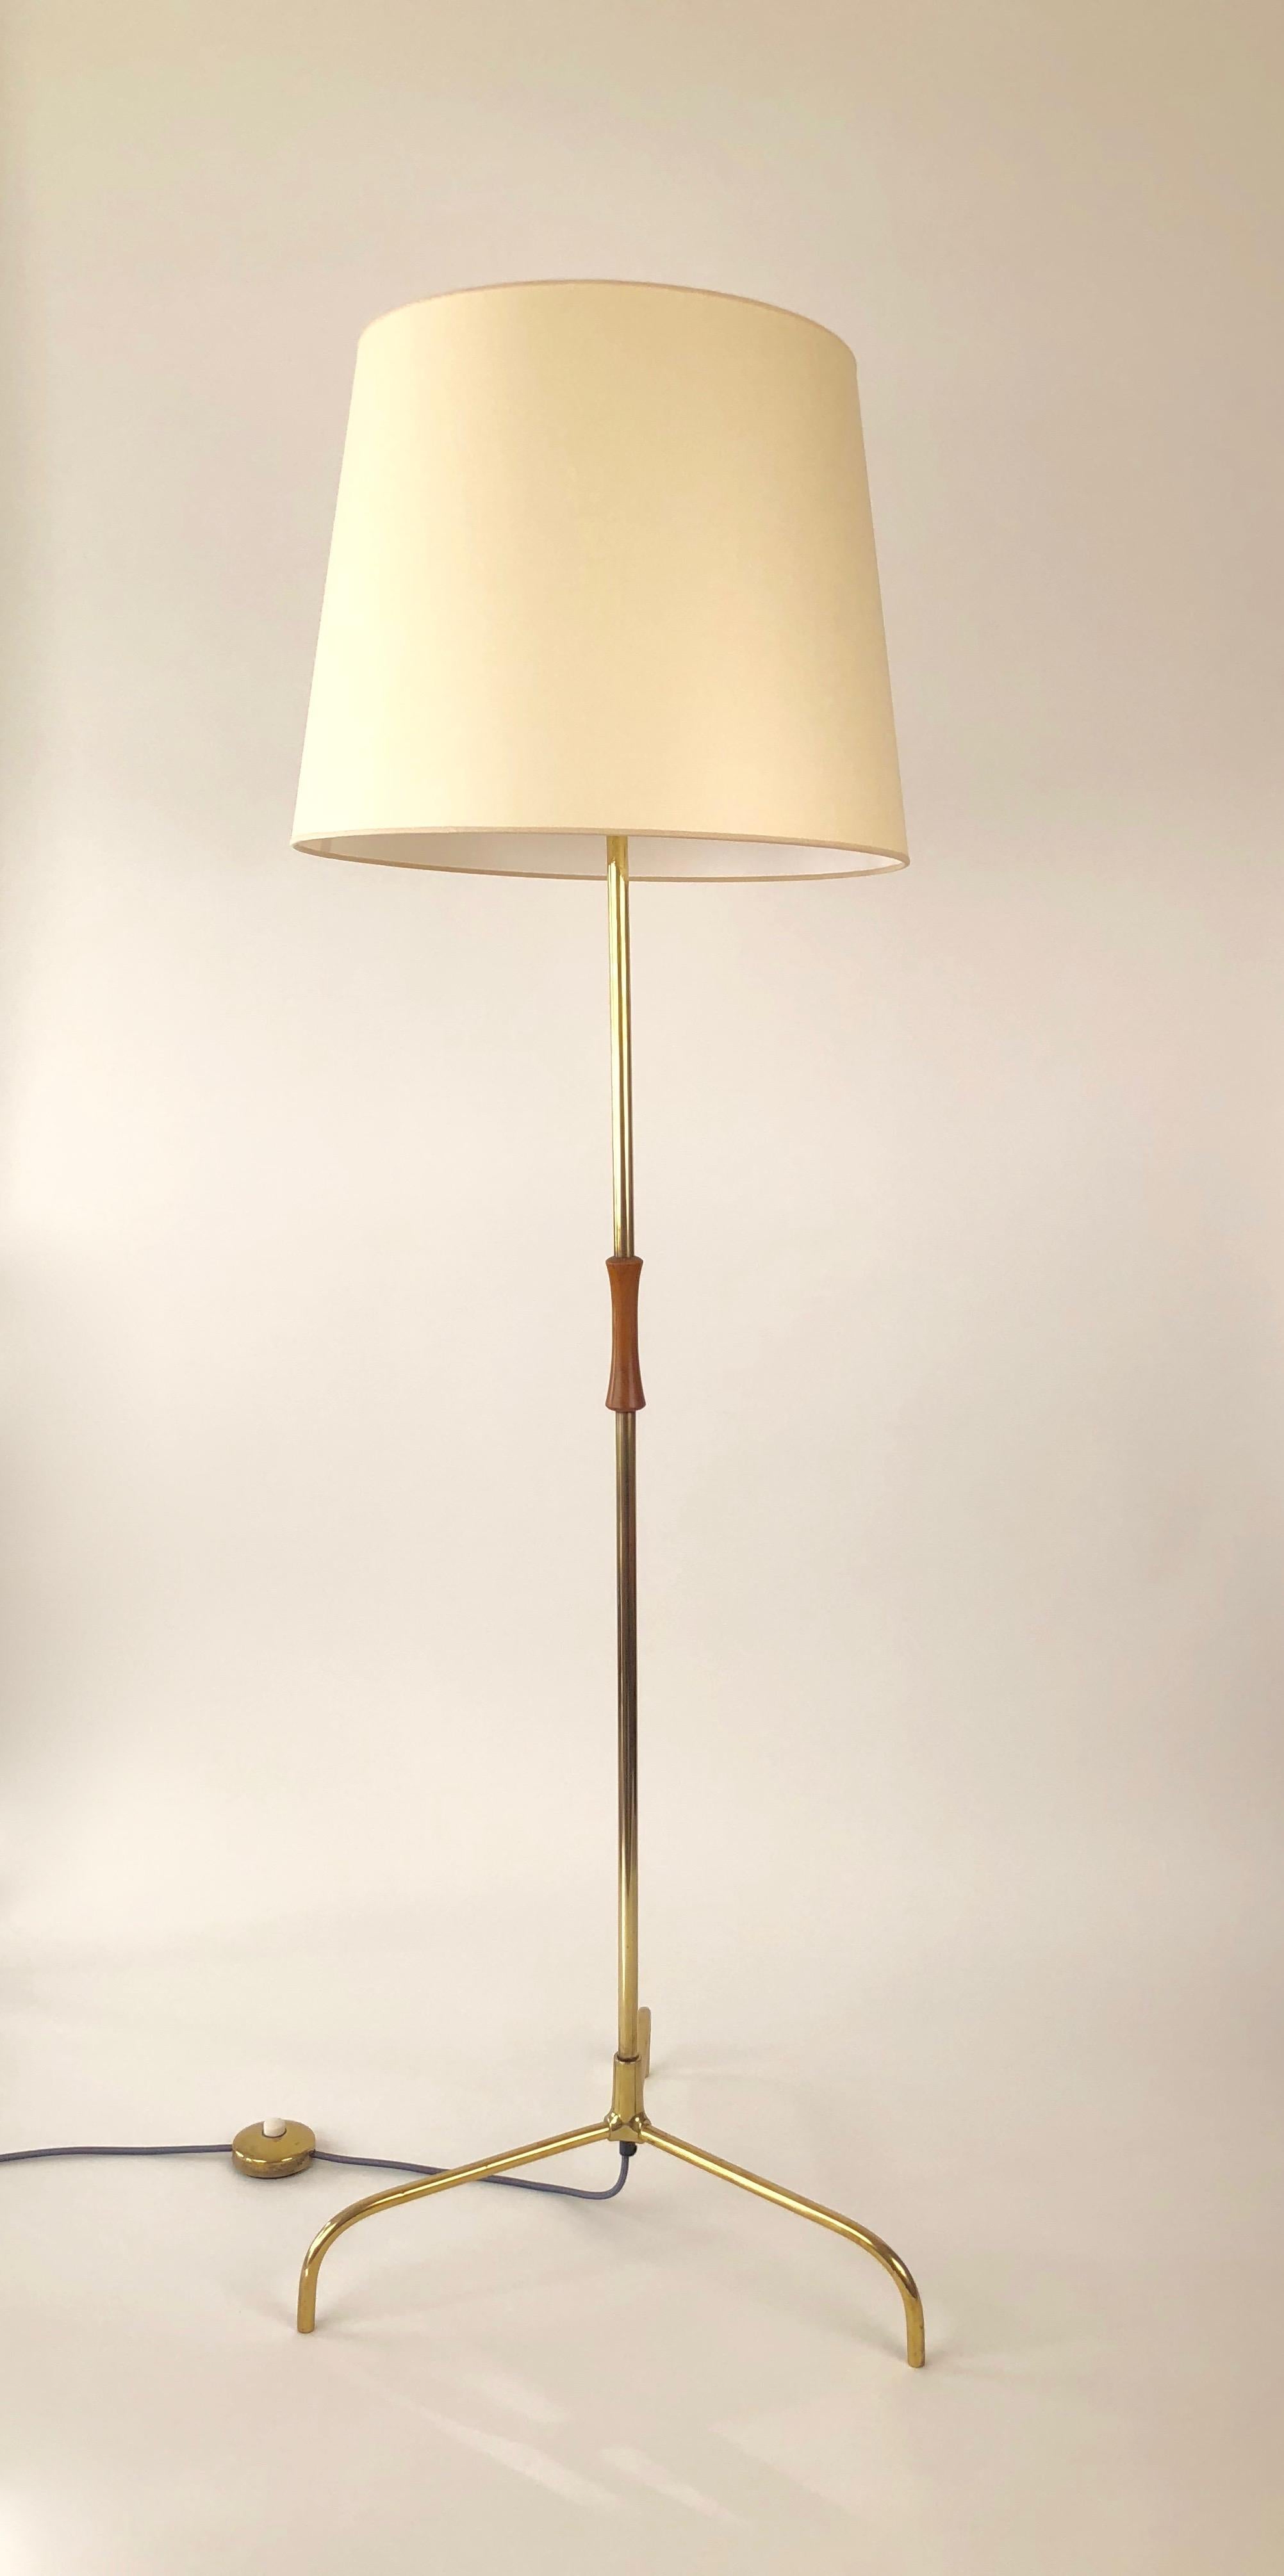 An elegant midcentury floor lamp from Kalmar, Manufactured in the 1950s in Vienna Austria, this polished brass floor lamp has been rewired with a grey cloth covered cable. The shade is new and represents the same proportions as the original. The